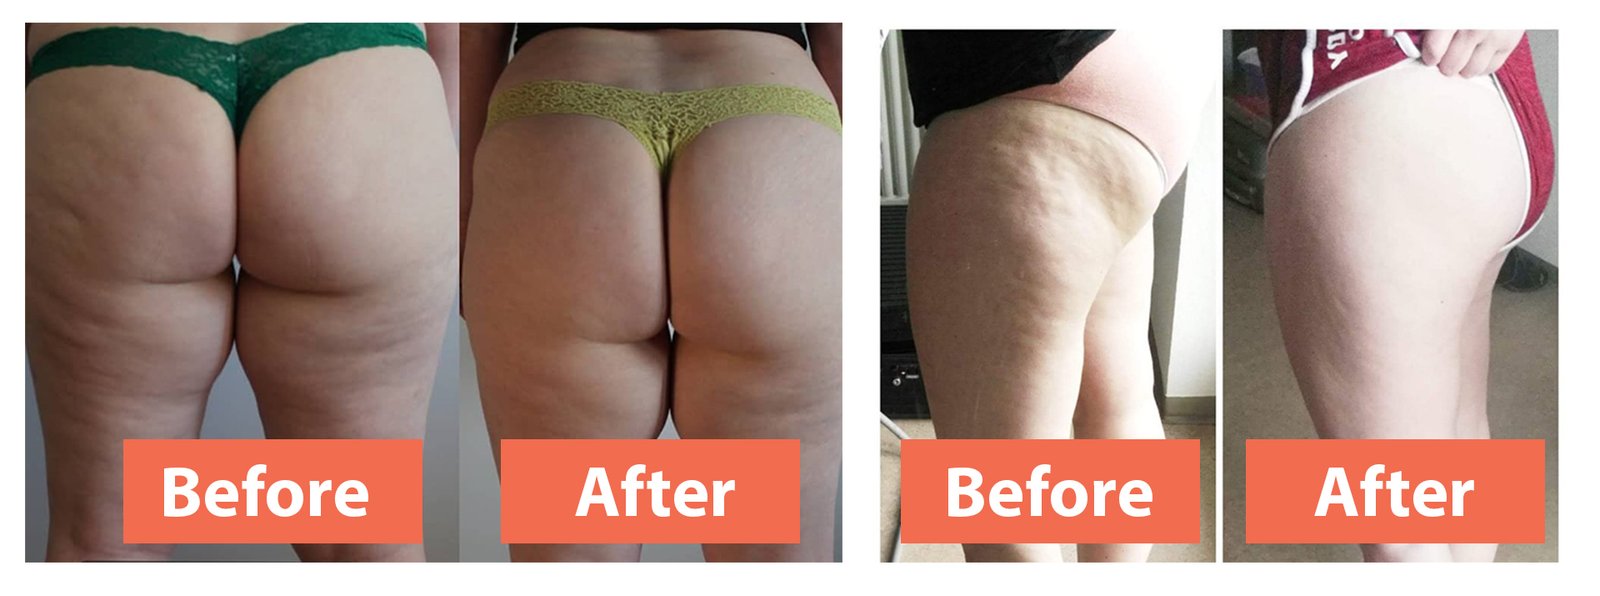 My Cellulite Solution results